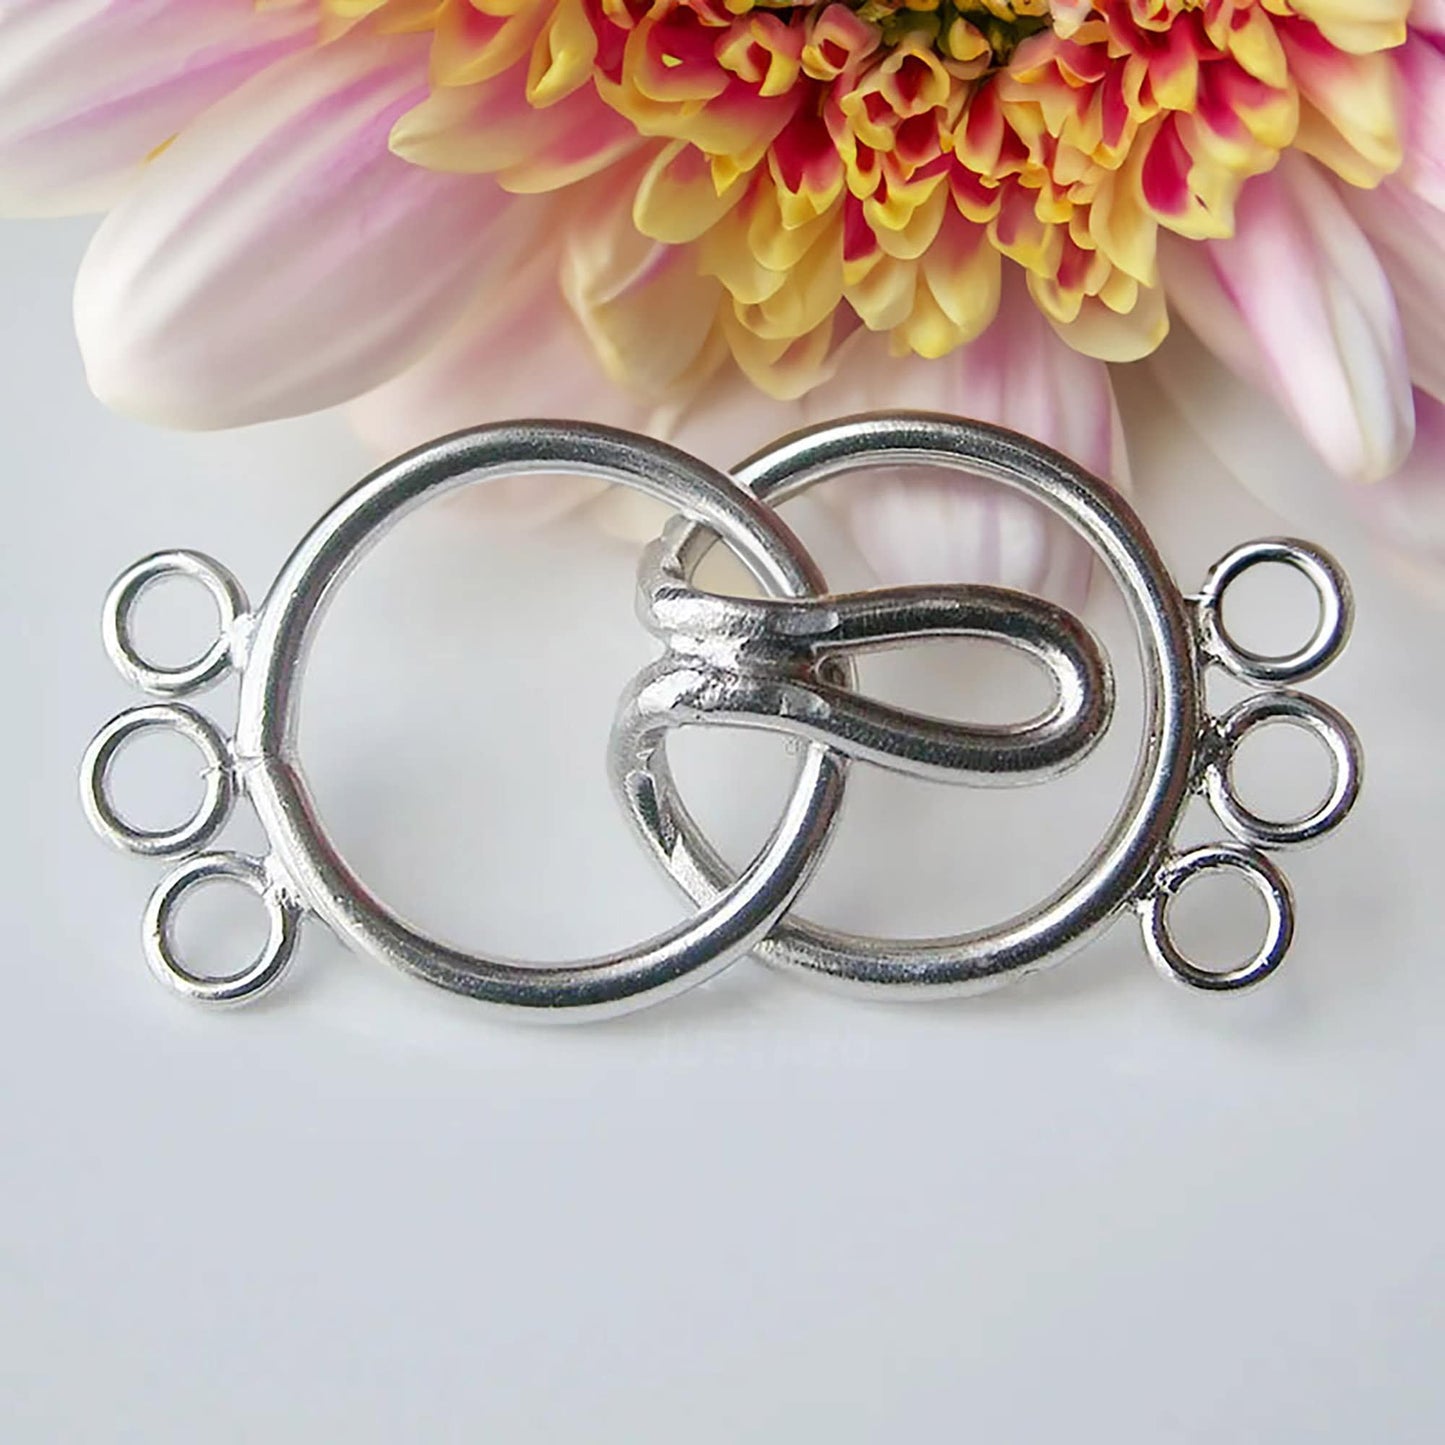 Multi Strand Hook and Eye, Solid 925 Sterling Silver, 3 Three Strand Round Design for Craft Supplies